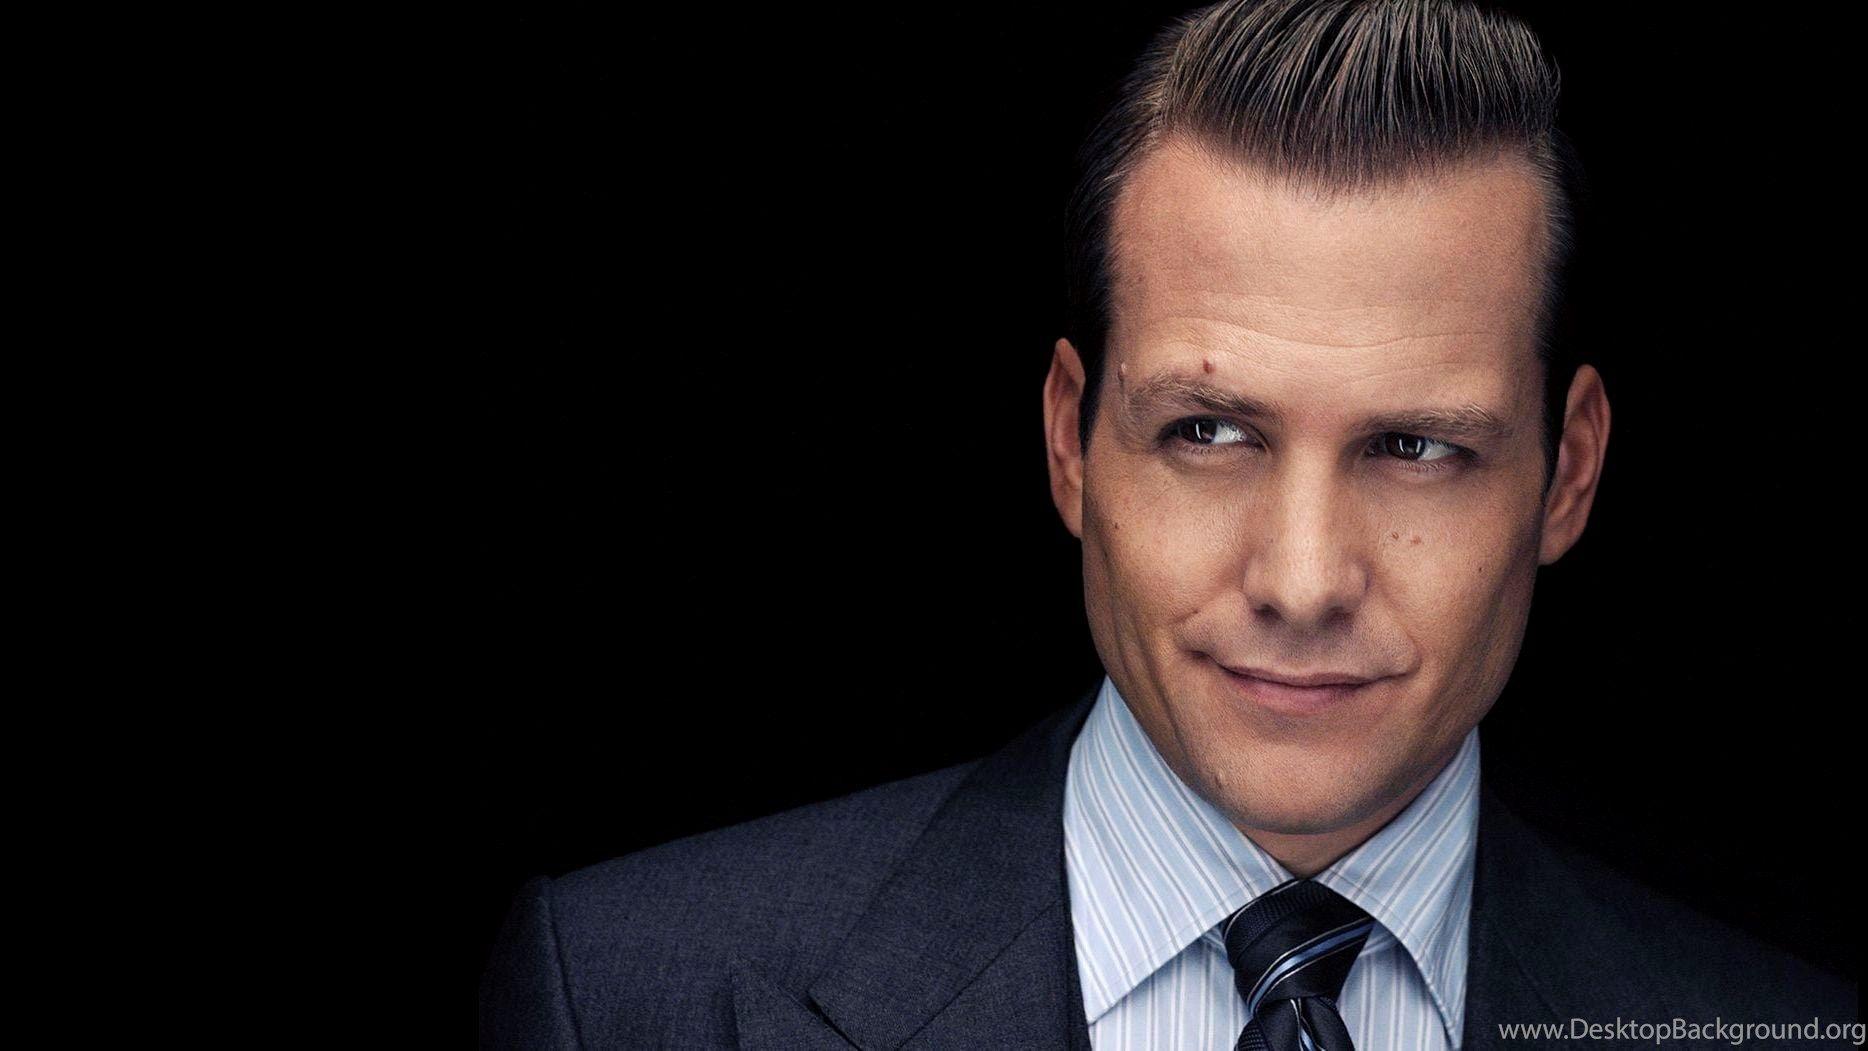 Harvey Specter Quotes From Suits That Will Help You Kick Some